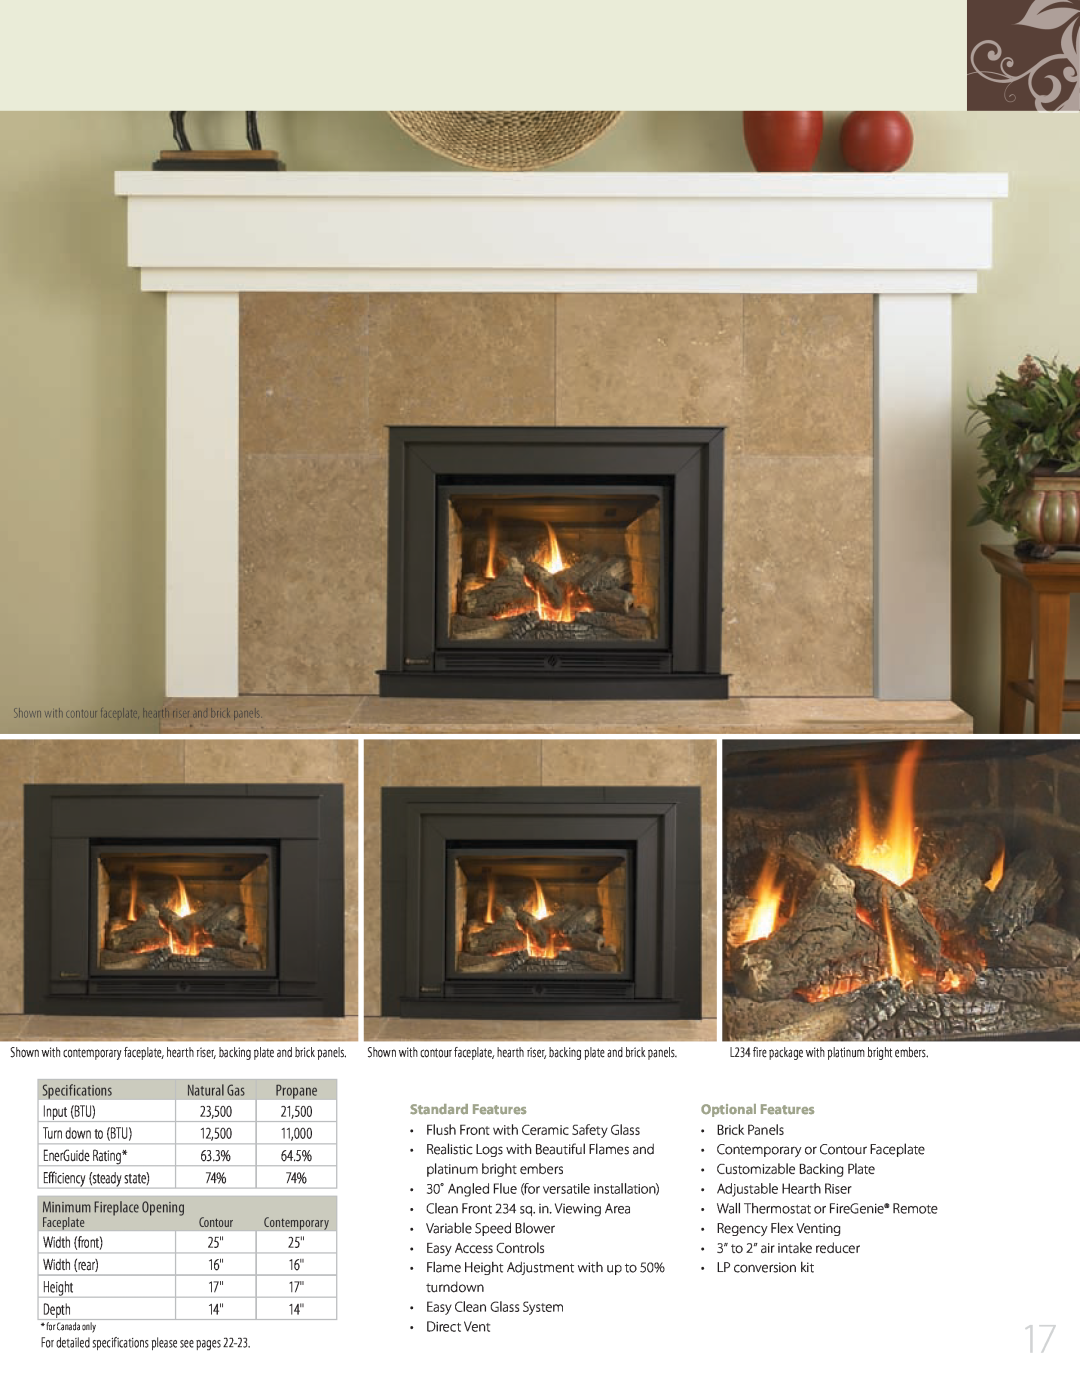 Regency 944-072 manual L234 fire package with platinum bright embers, Standard Features, Optional Features 